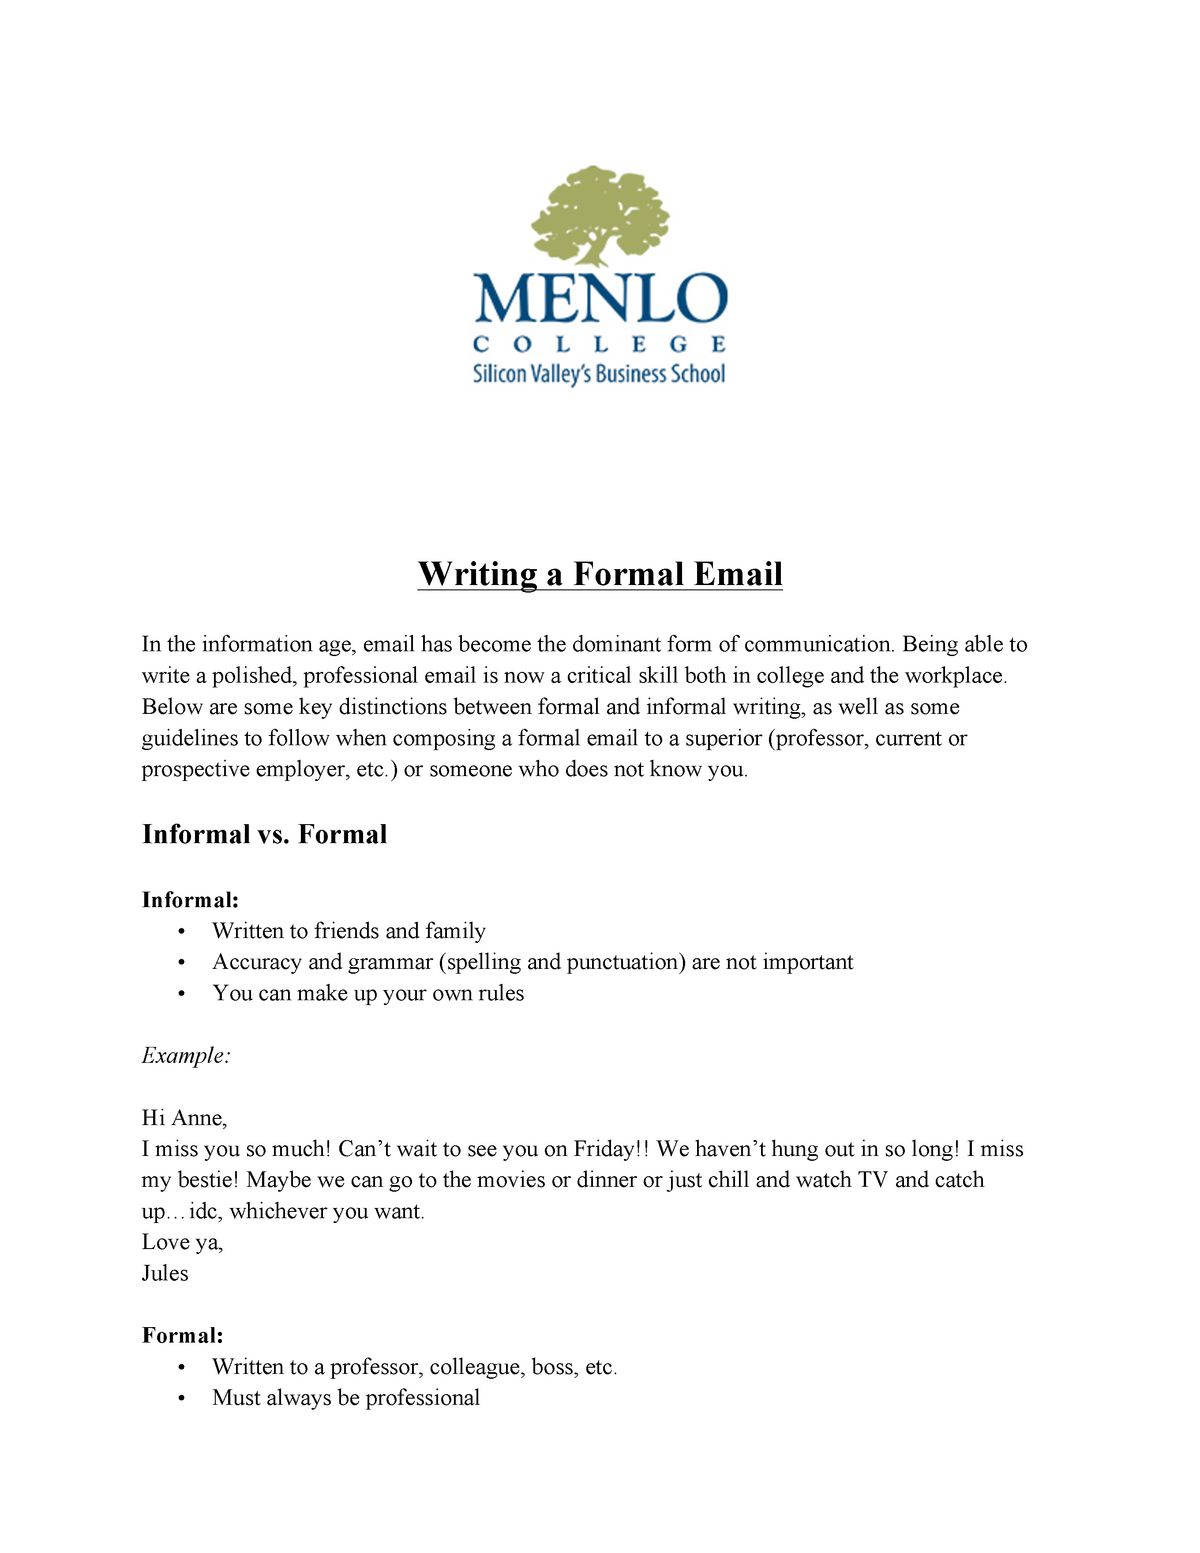 Writing a formal email - Writing a Formal Email In the information